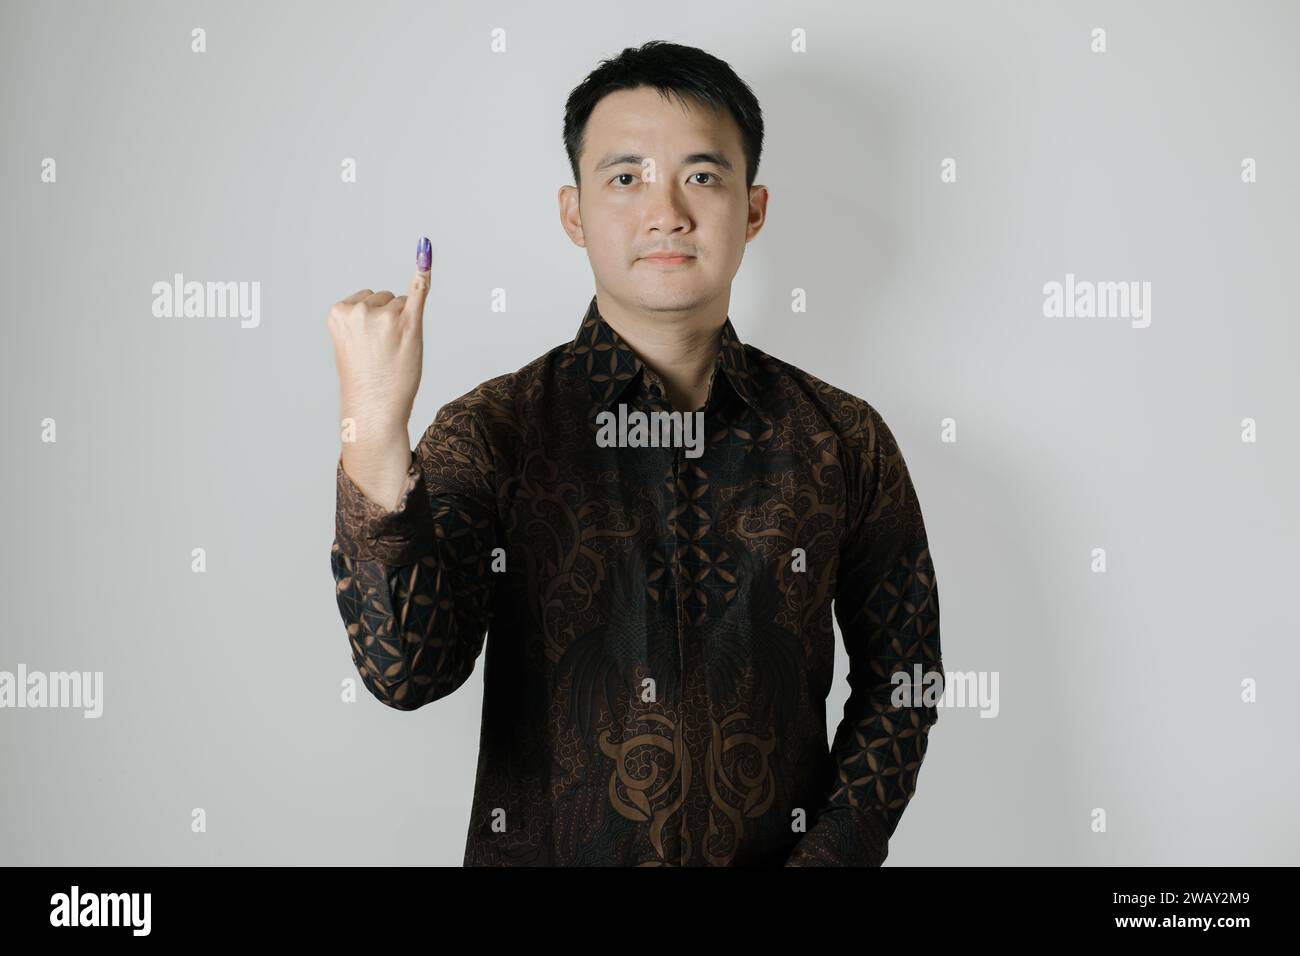 Asian man wearing Batik cloth is showing his little finger with purple ink applied after Pemilu or Indonesian presidential election Stock Photo